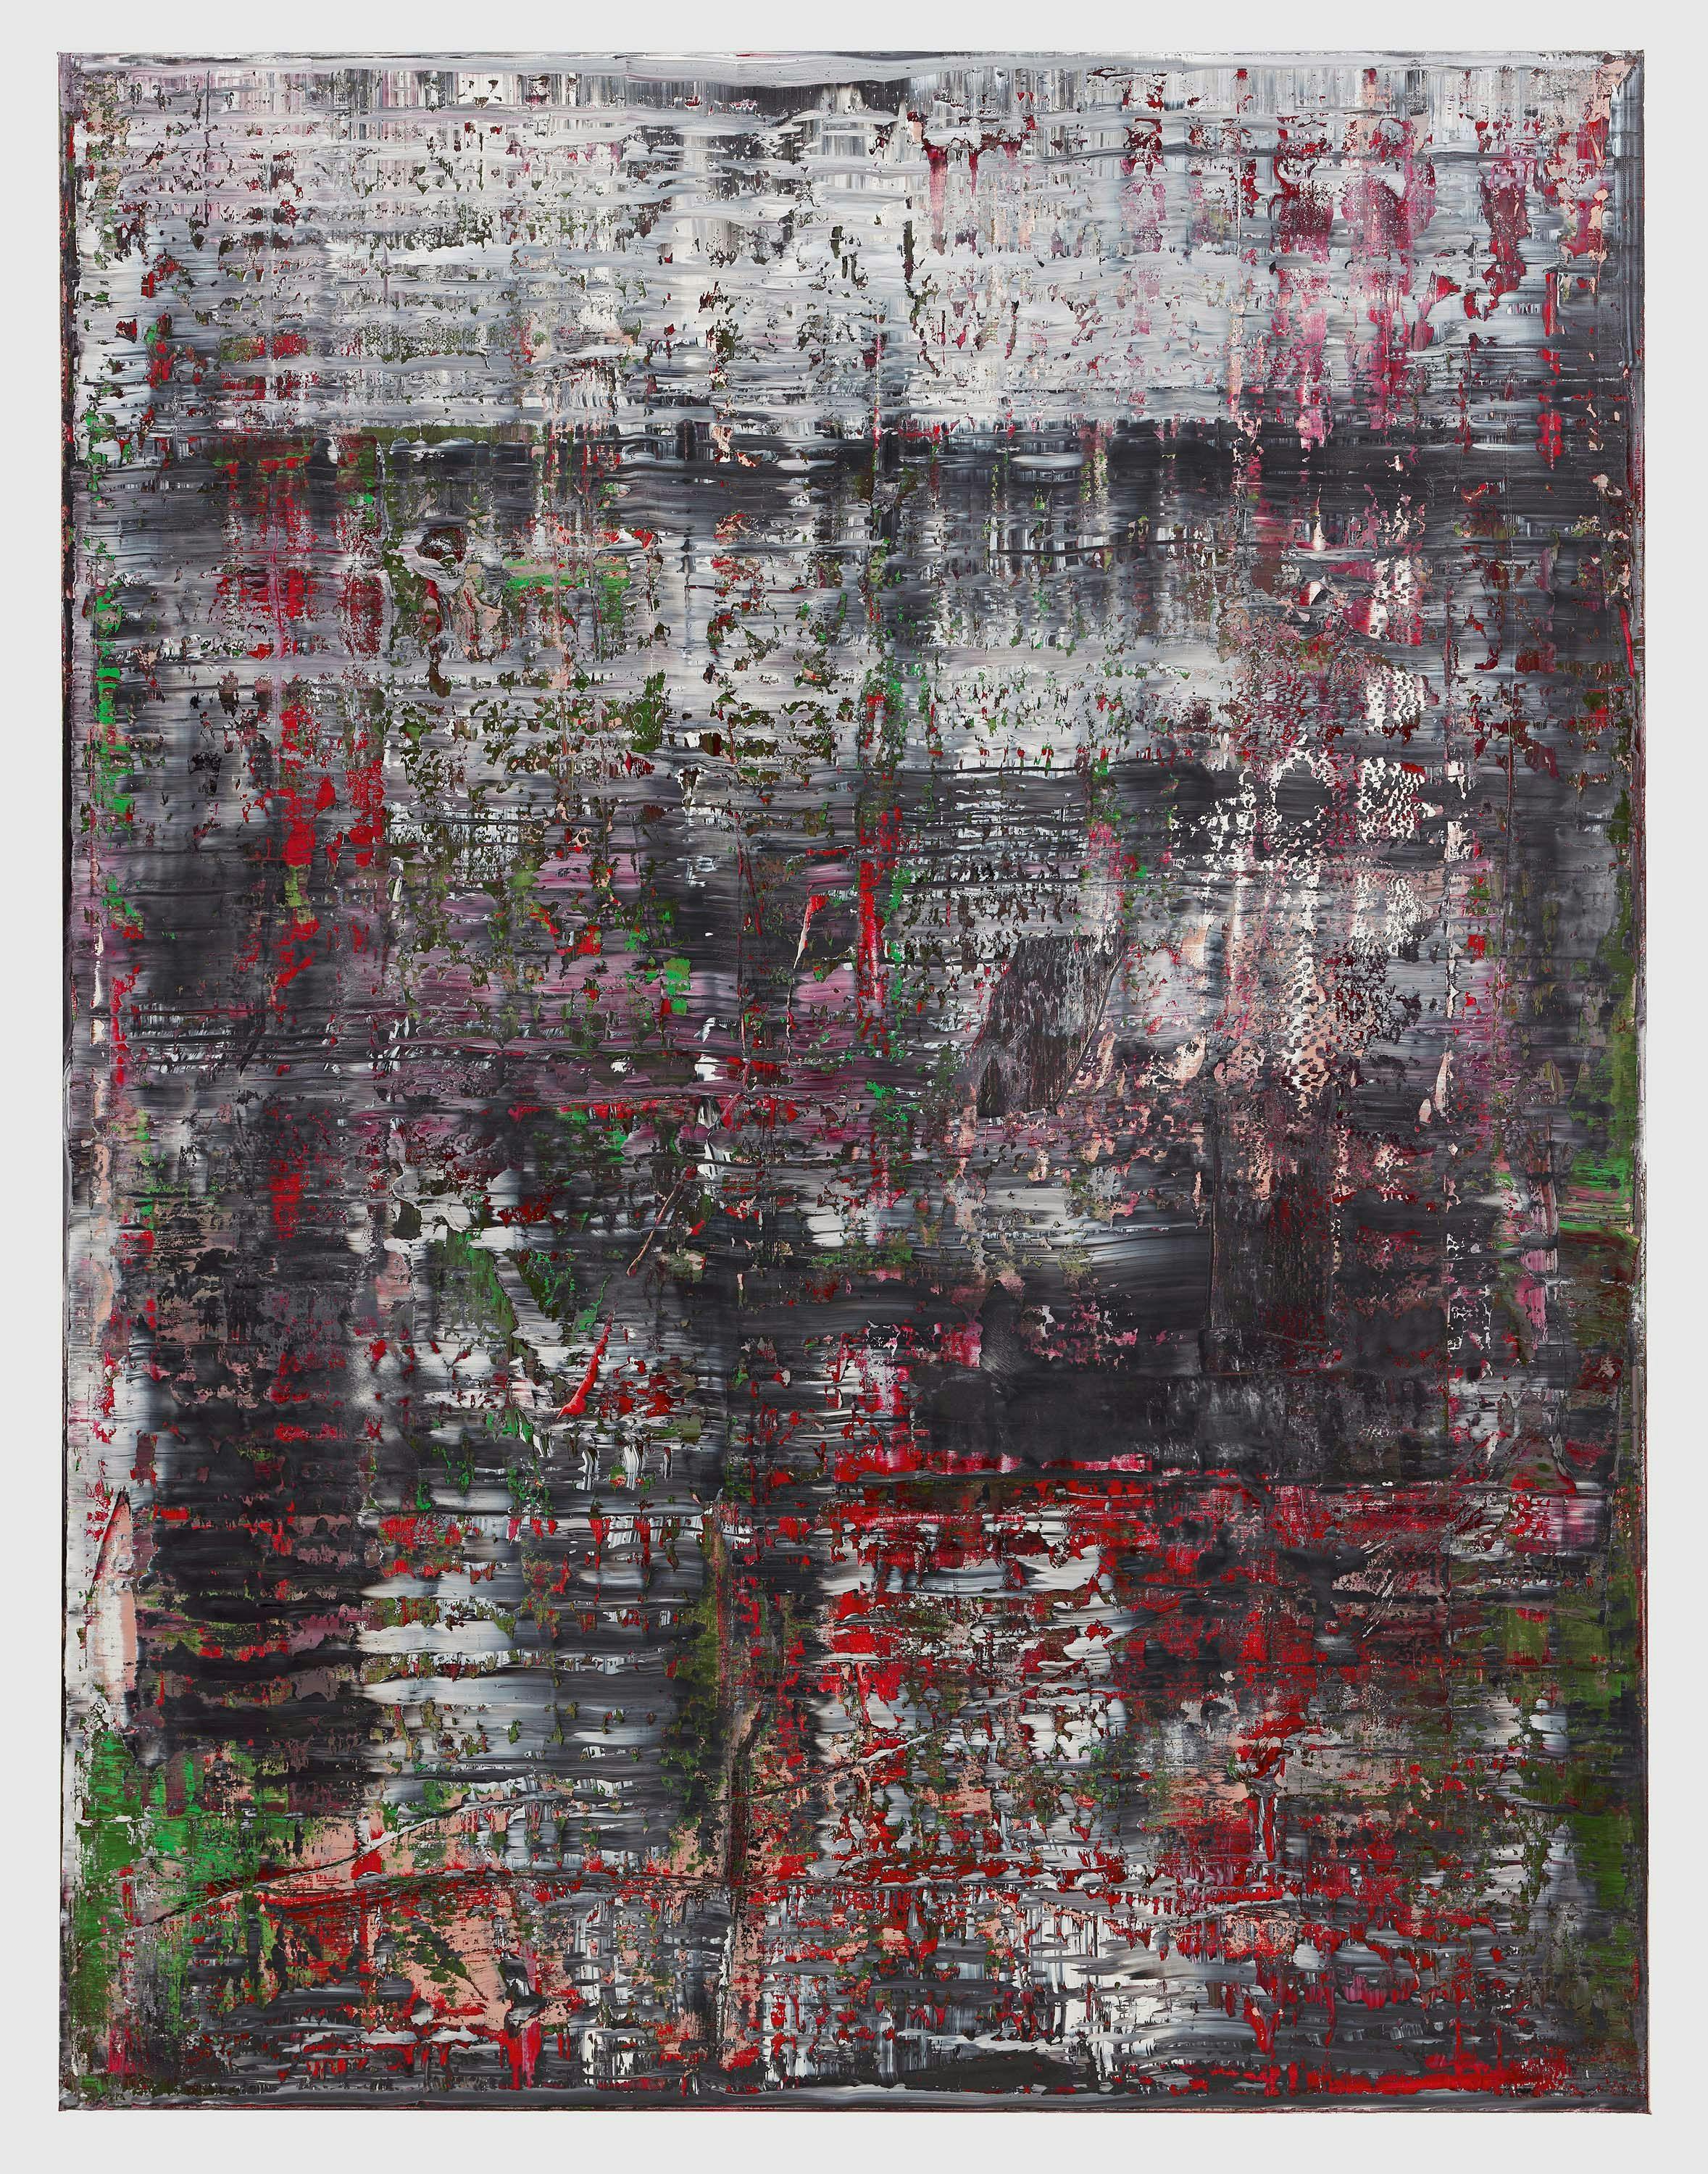 A painting by Gerhard Richter, titled Birkenau, dated 2014.